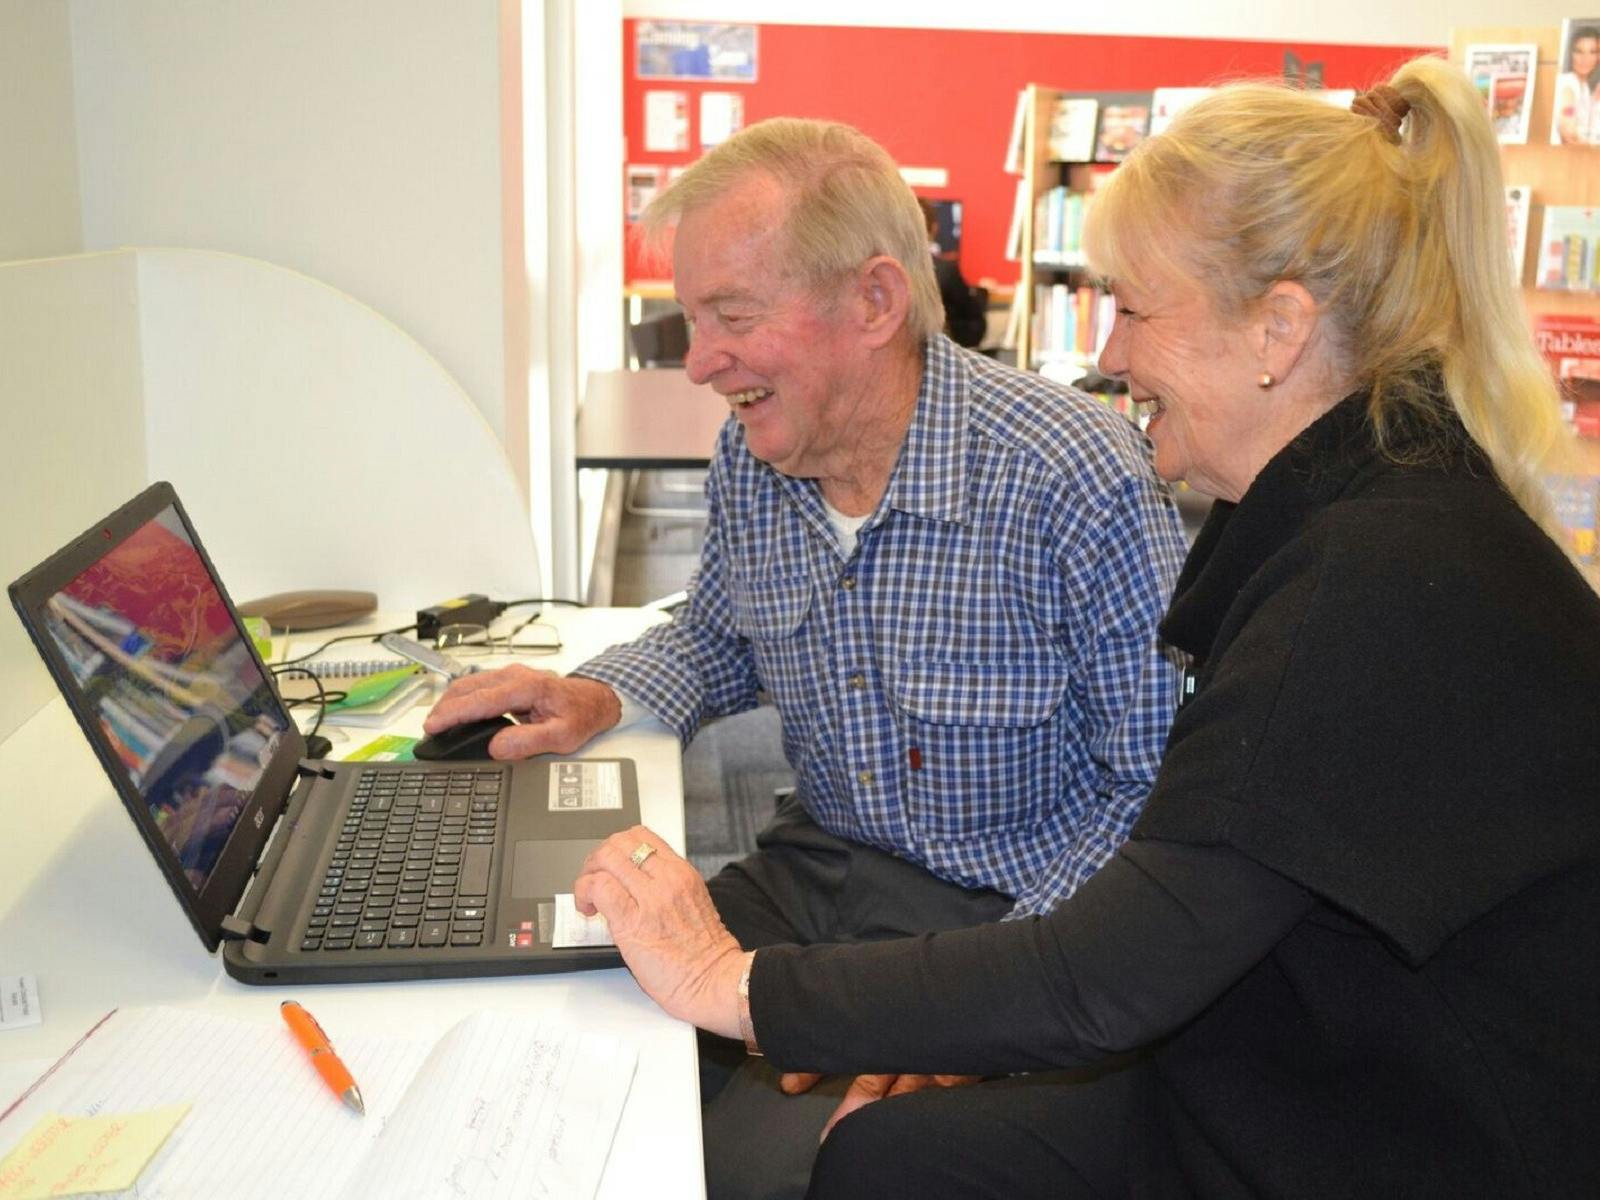 IT support and assistance at the Benalla Library